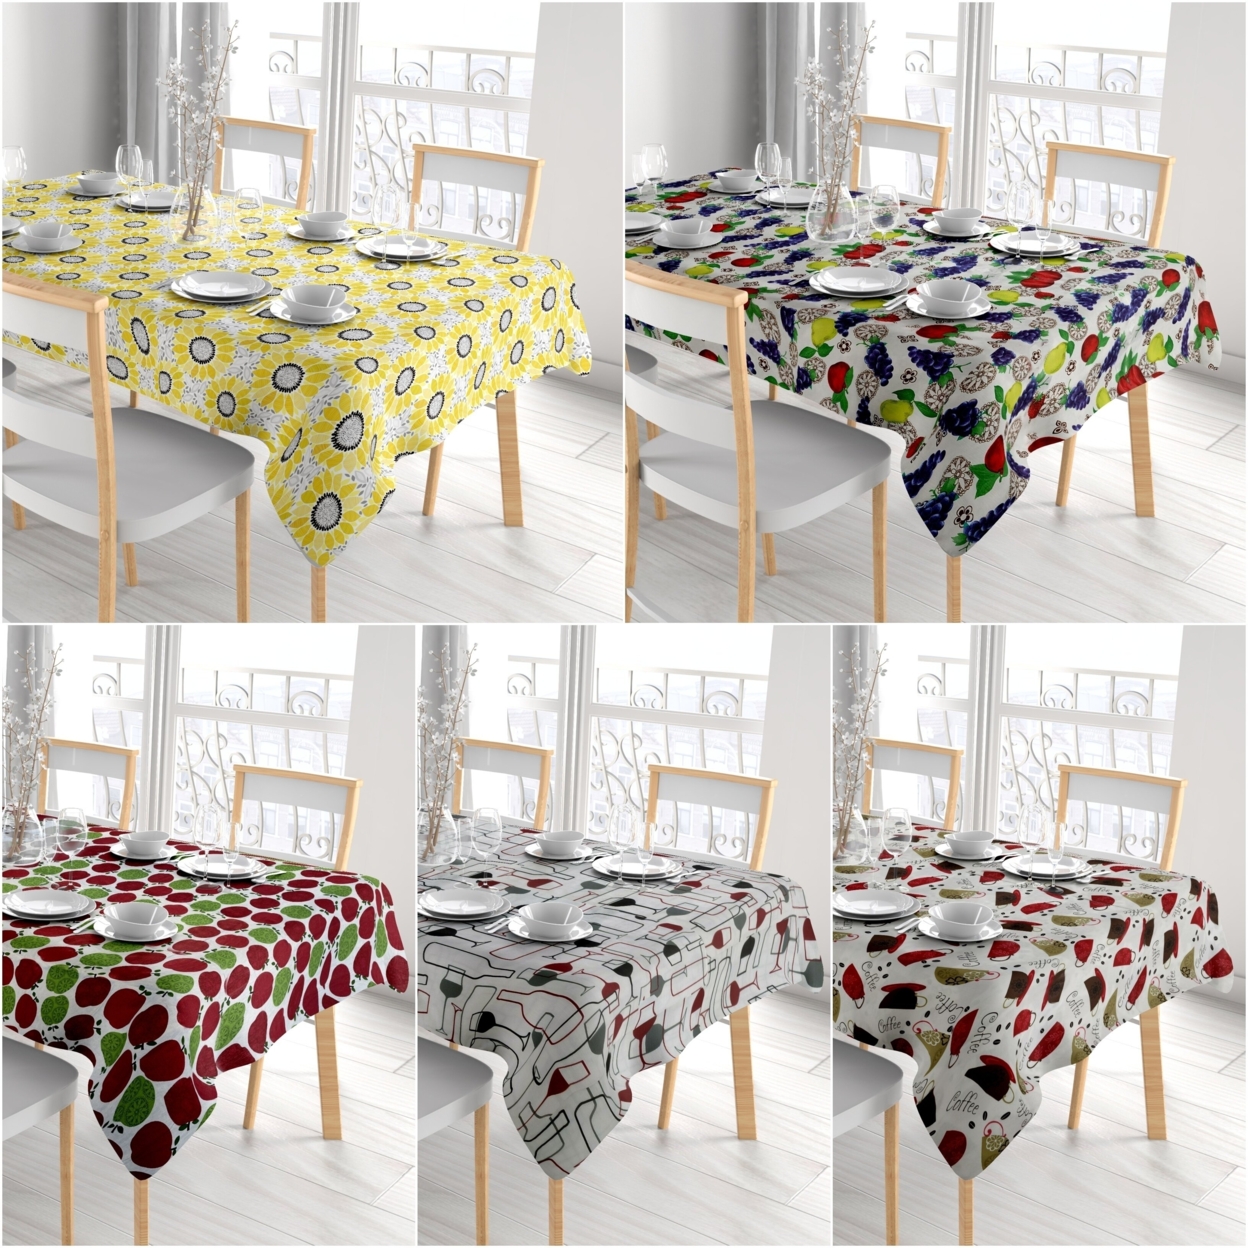 2-Pack Waterproof Printed Flannel Back Vinyl Tablecloth - Assorted, 52 X 90